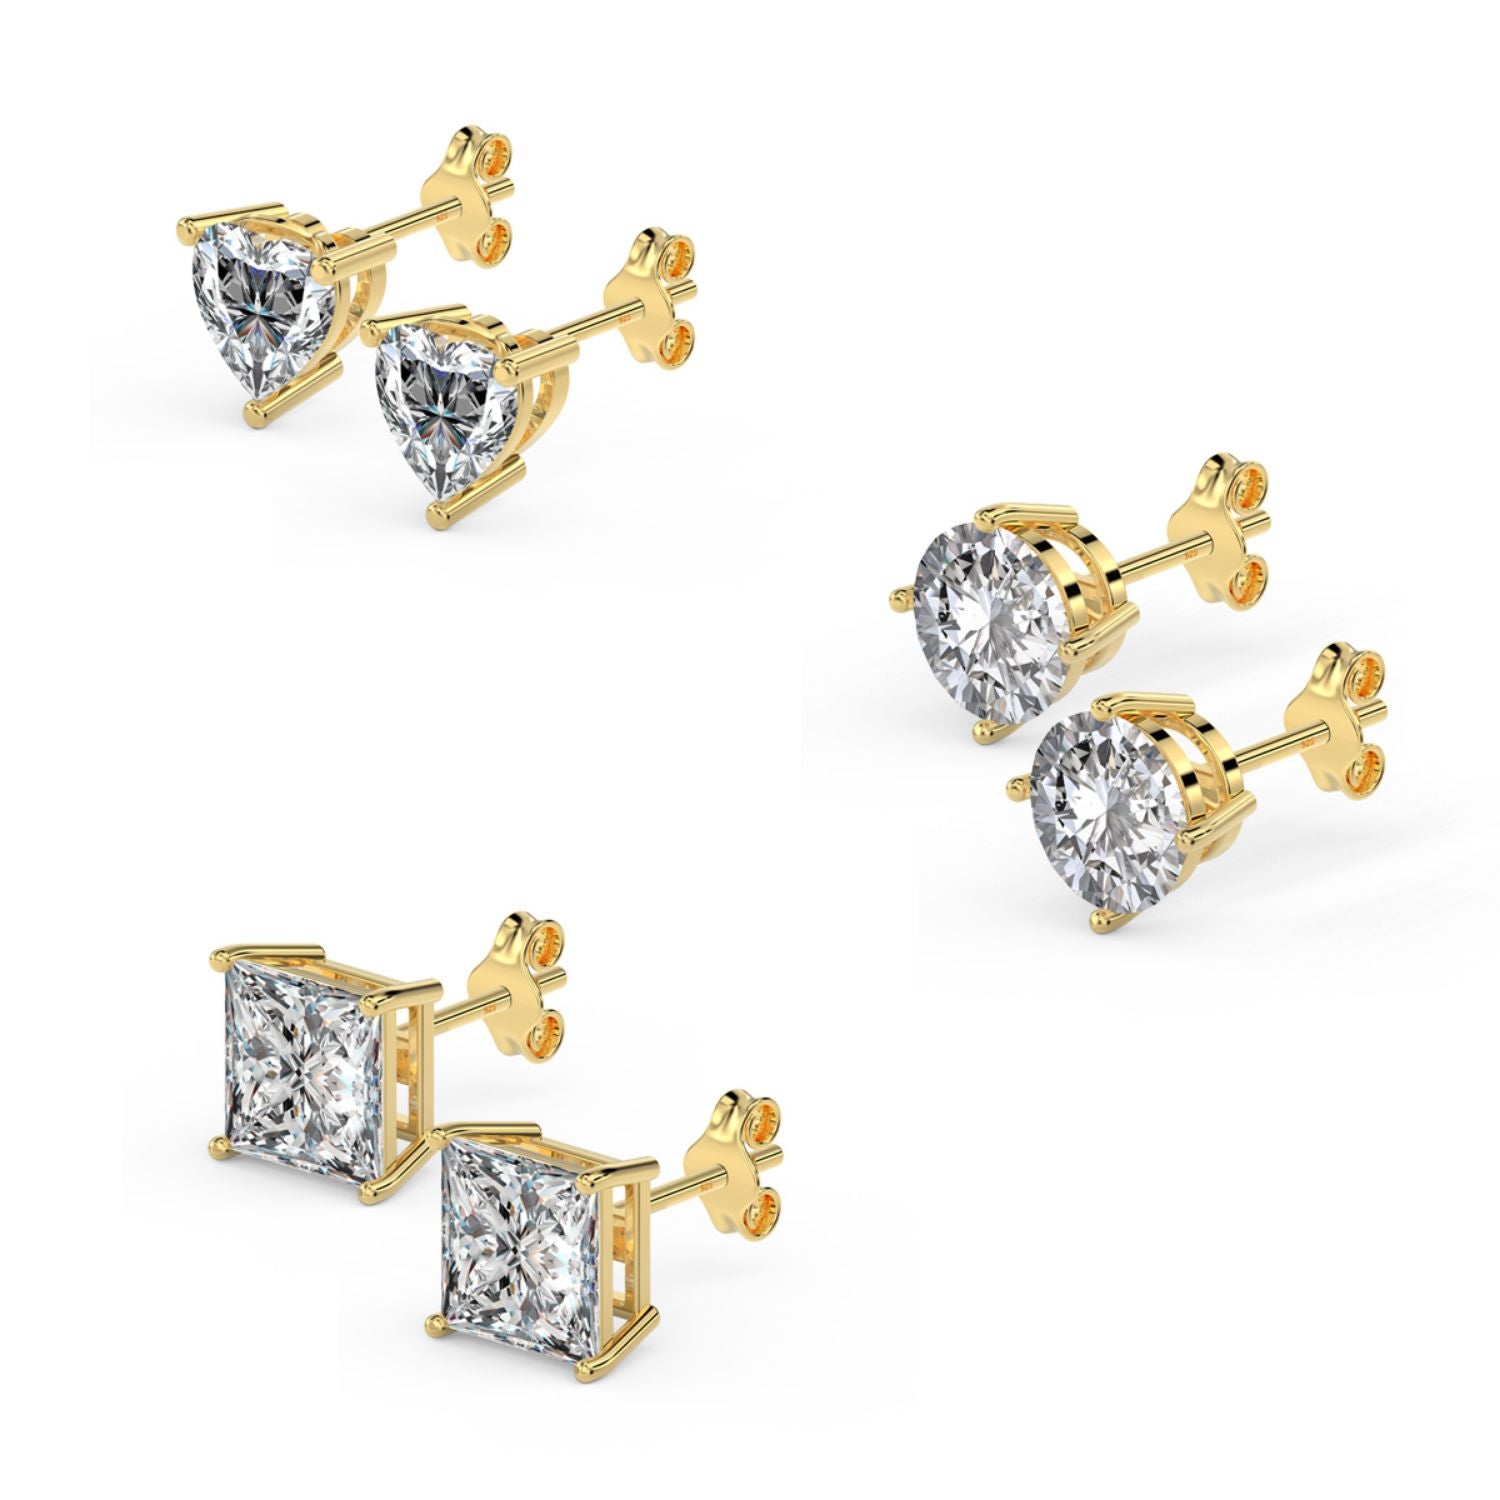 925 Sterling Silver Set of 3 Pair Gold plated Round Square Heart Shape White CZ 4mm Stone Stud Earrings for Girls Women